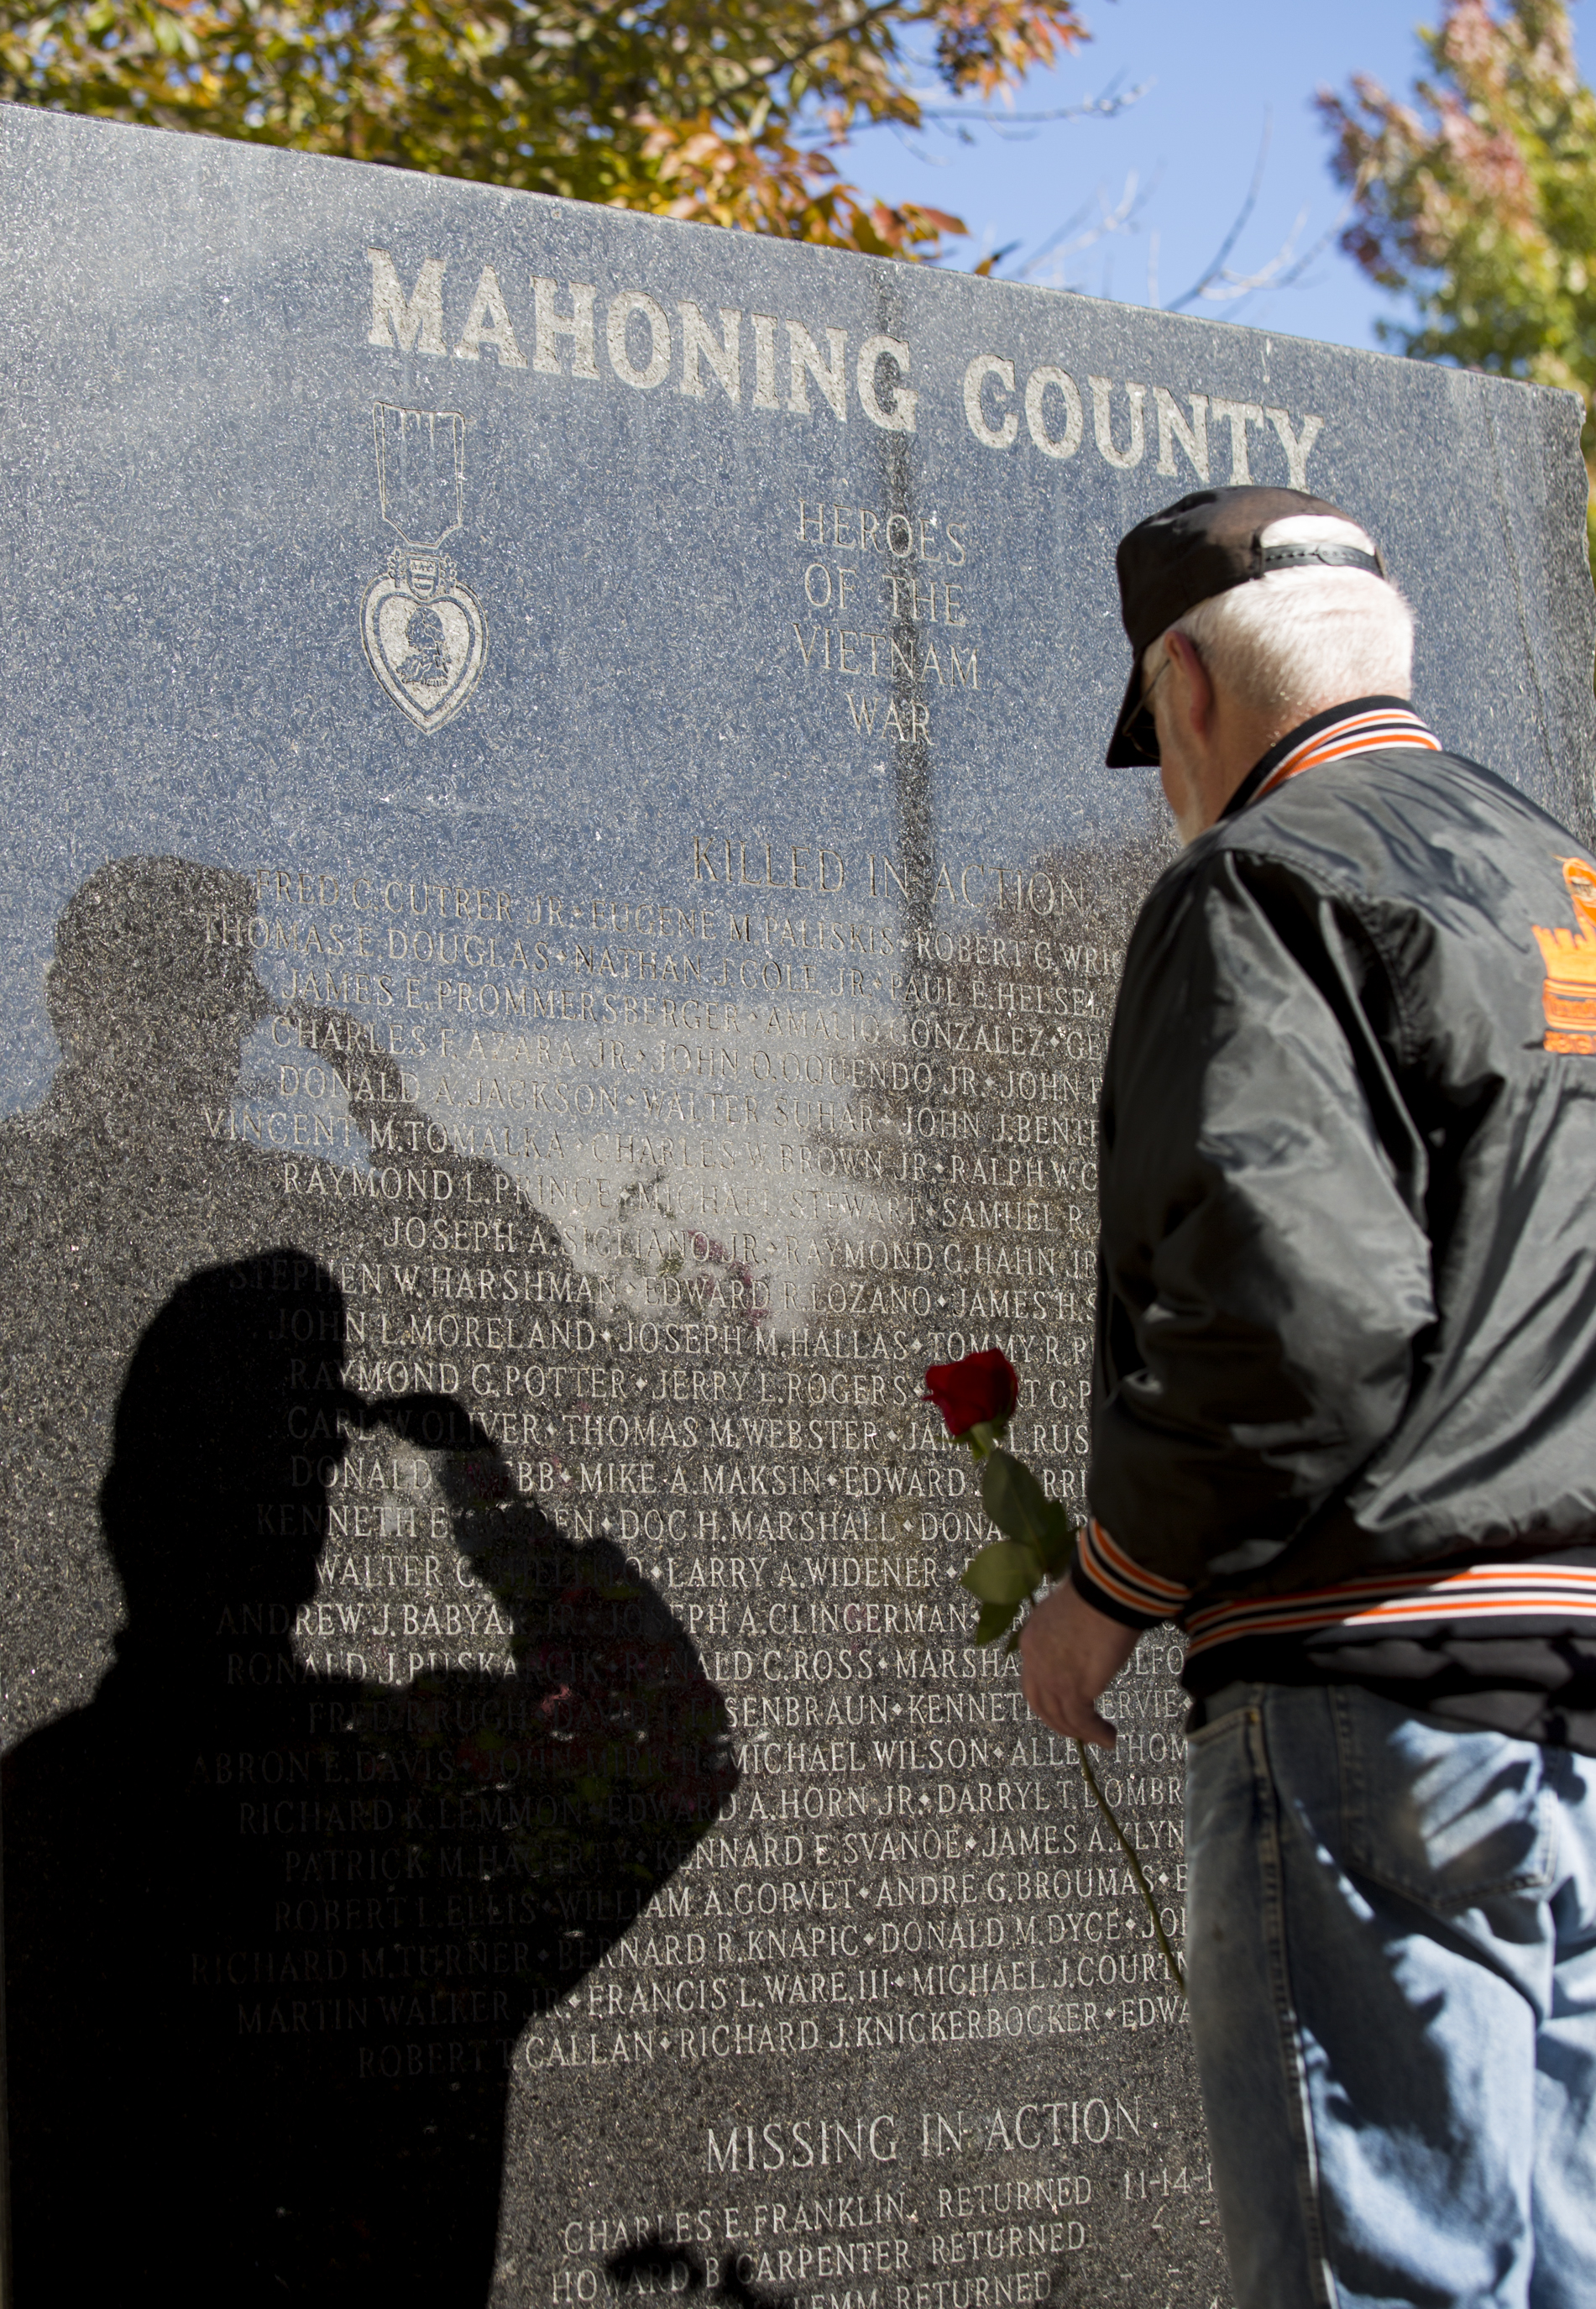  A veteran casts a shadow on the Vietnam Veterans Memorial in Youngstown, Ohio as he salutes before placing a rose at the foot of the memorial during the annual Laying of the Roses ceremony to honor Mahoning County-native fallen soldiers of the Vietn